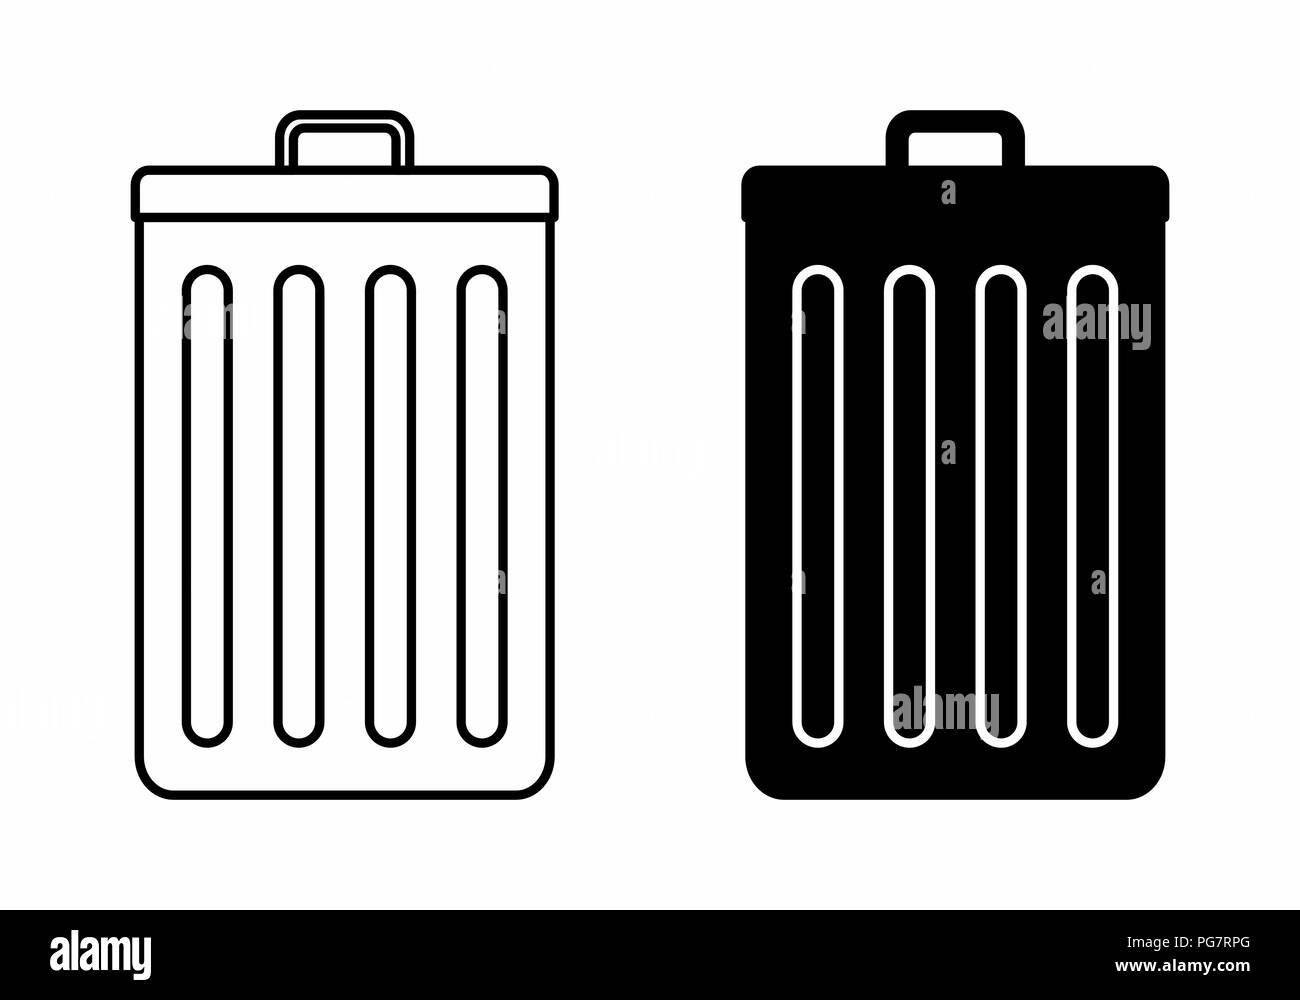 Black and white illustration of isolated trash cans Stock Vector